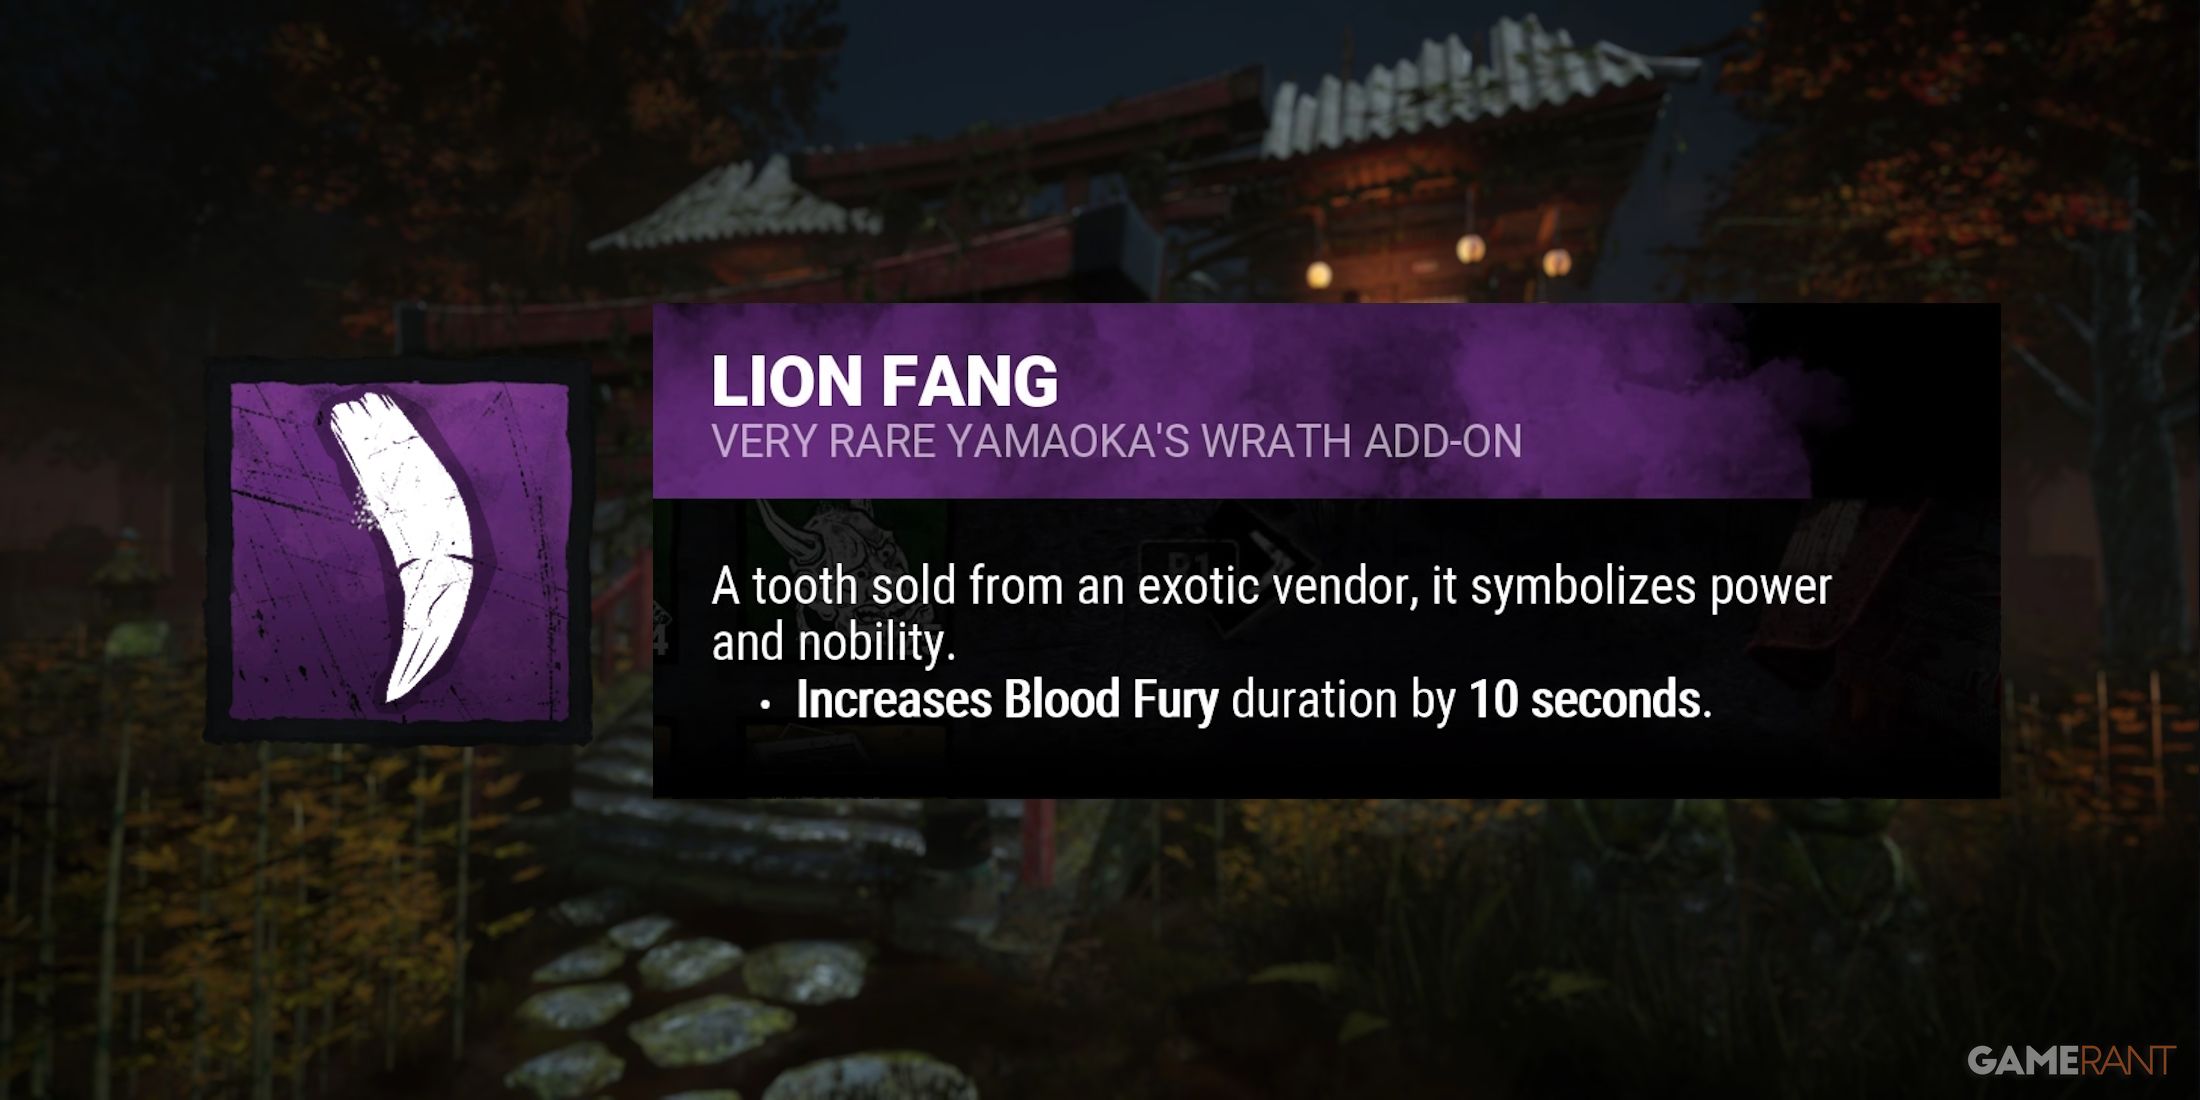 dead by daylight the oni lion fang add-on